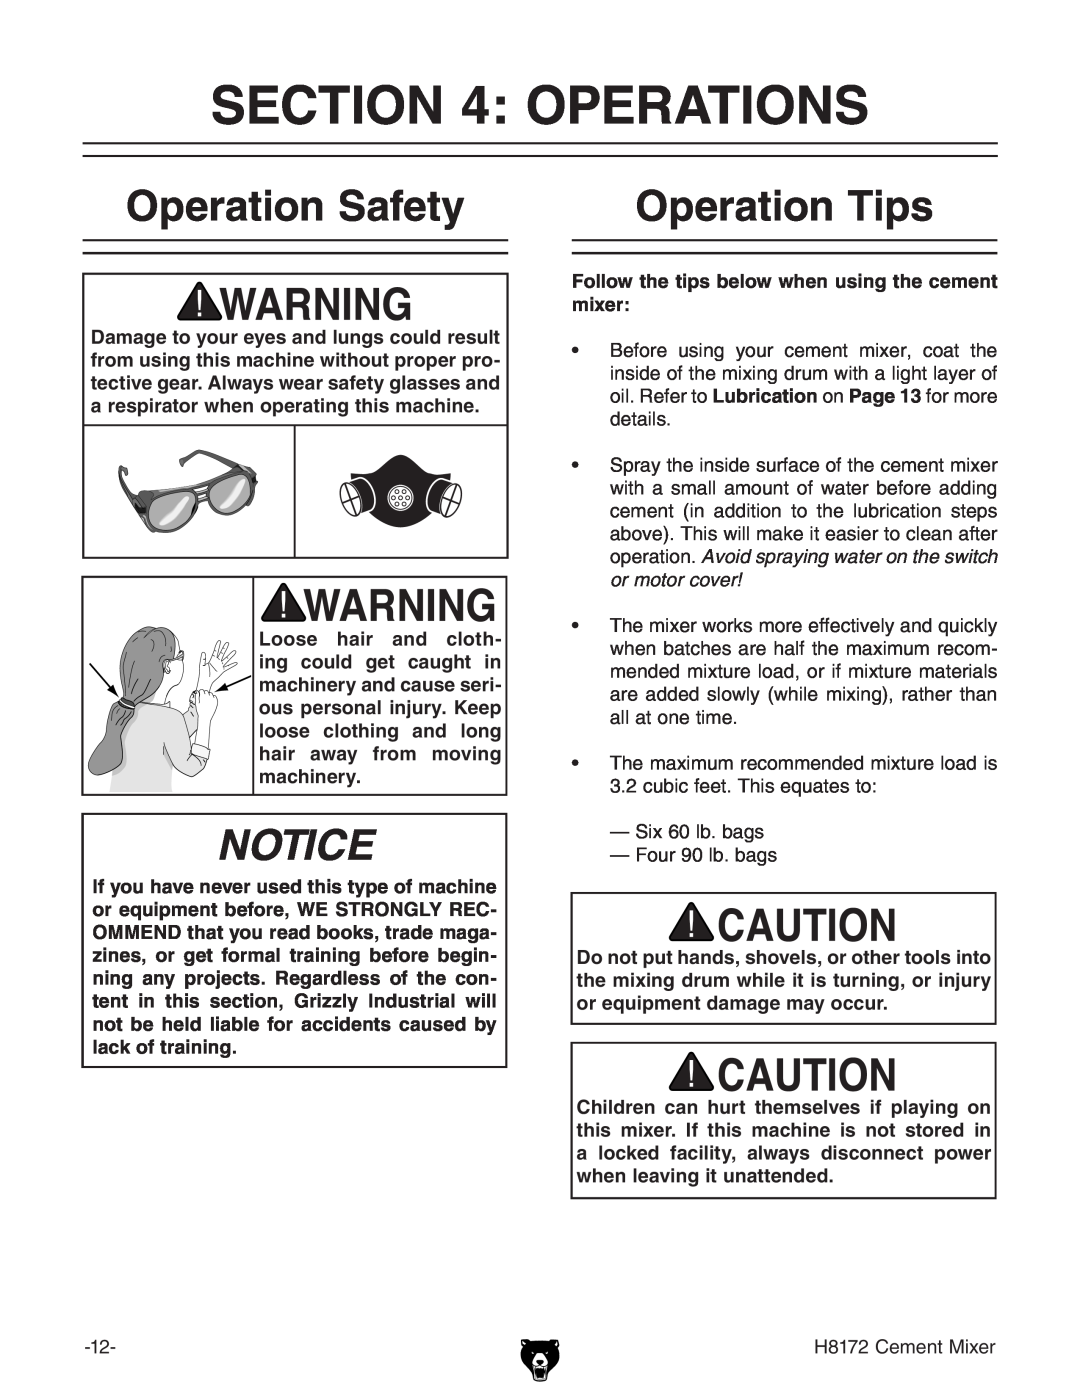 Grizzly H8172 owner manual Operations, Operation Safety, Operation Tips 